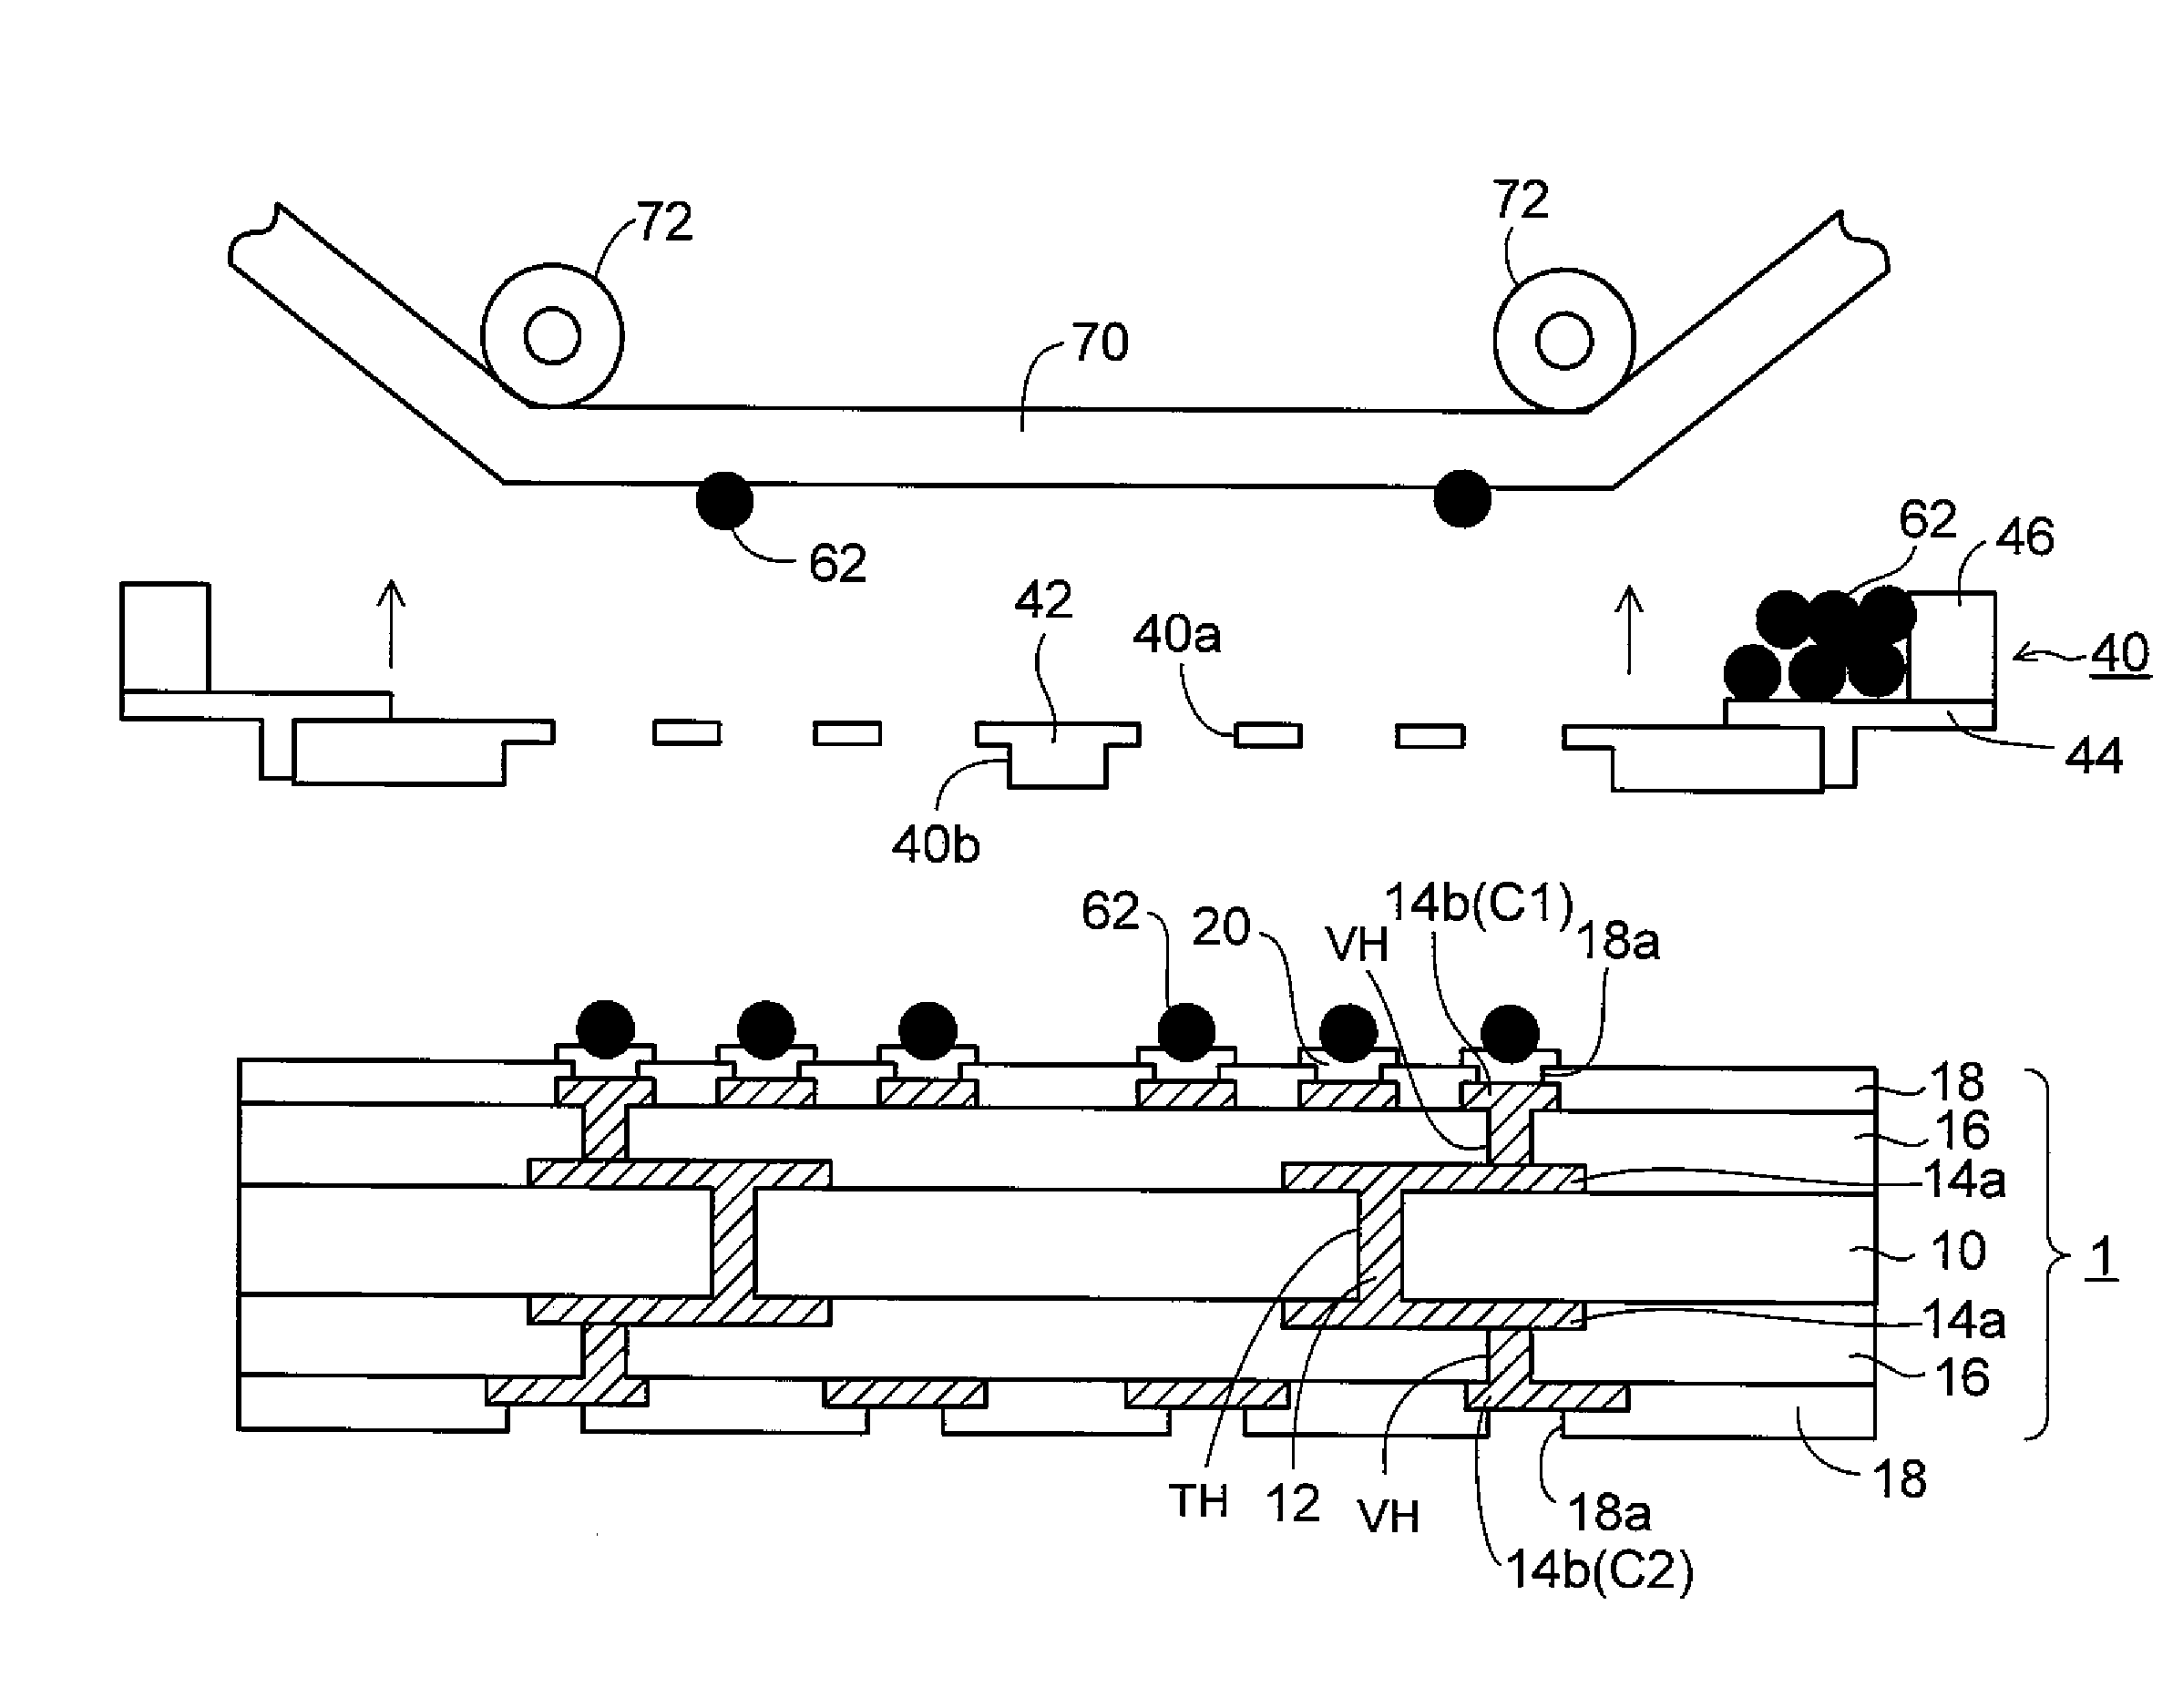 Method of mounting conductive ball and conductive ball mounting apparatus